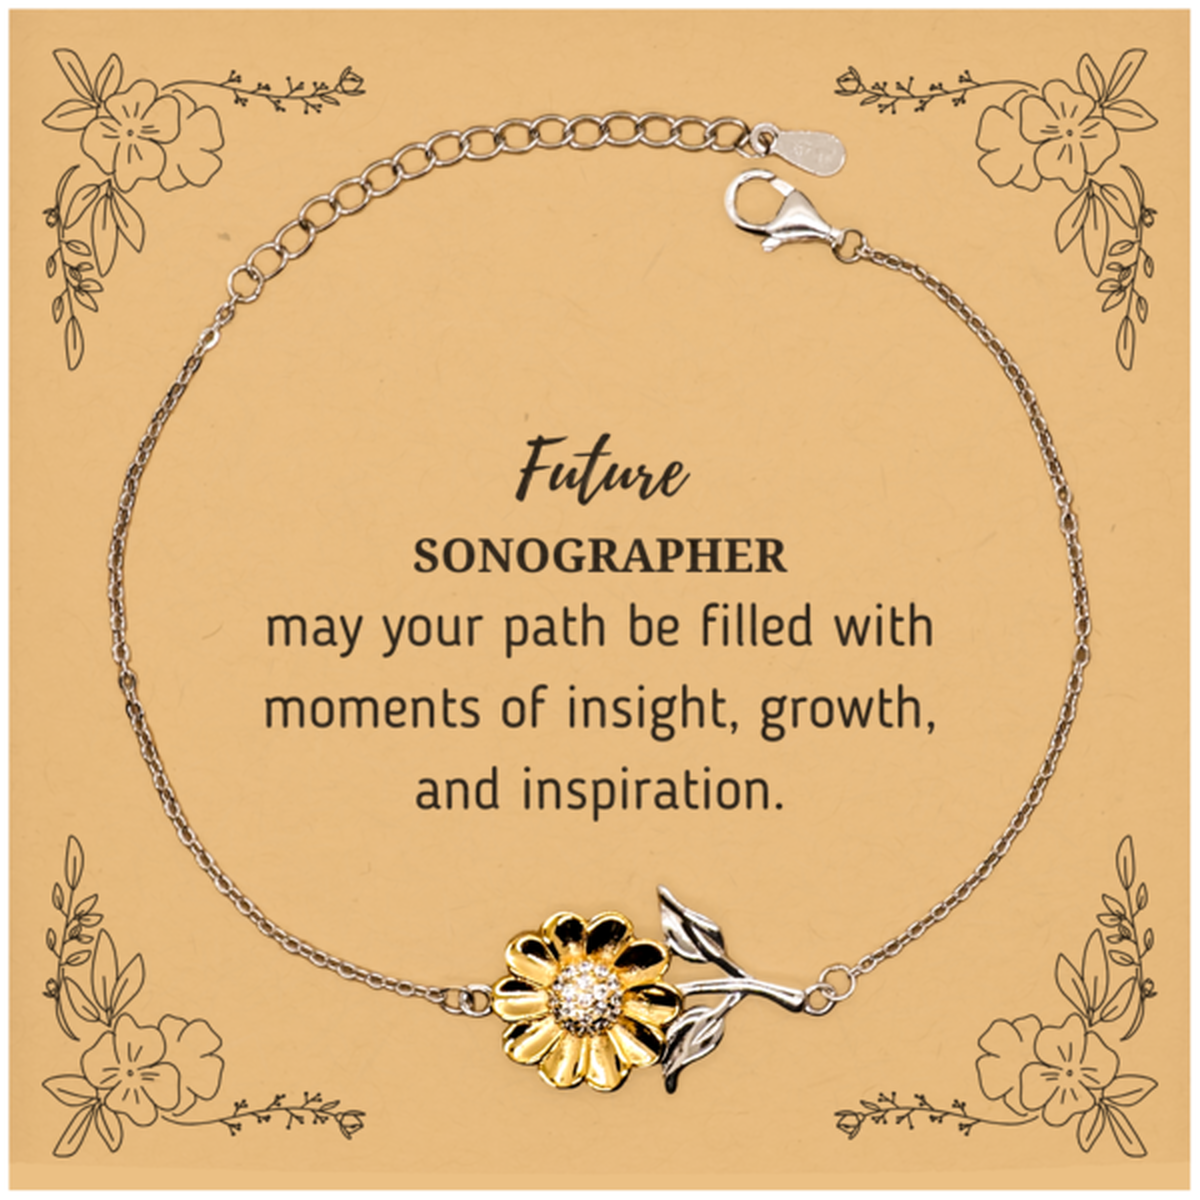 Future Sonographer Gifts, May your path be filled with moments of insight, Graduation Gifts for New Sonographer, Christmas Unique Sunflower Bracelet For Men, Women, Friends